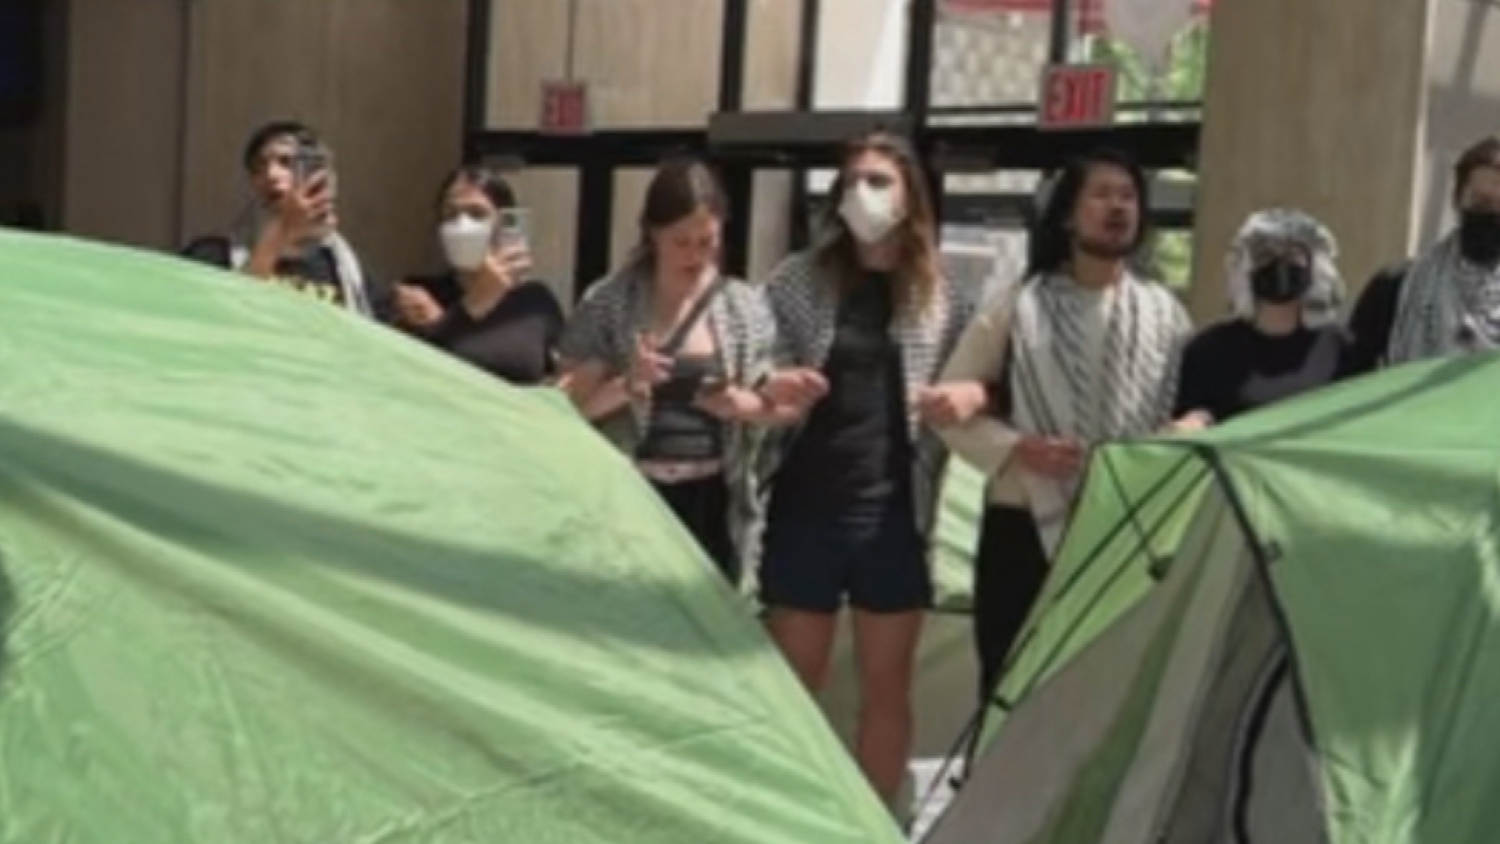 Protesters set up camp in Fordham University's Lincoln Center